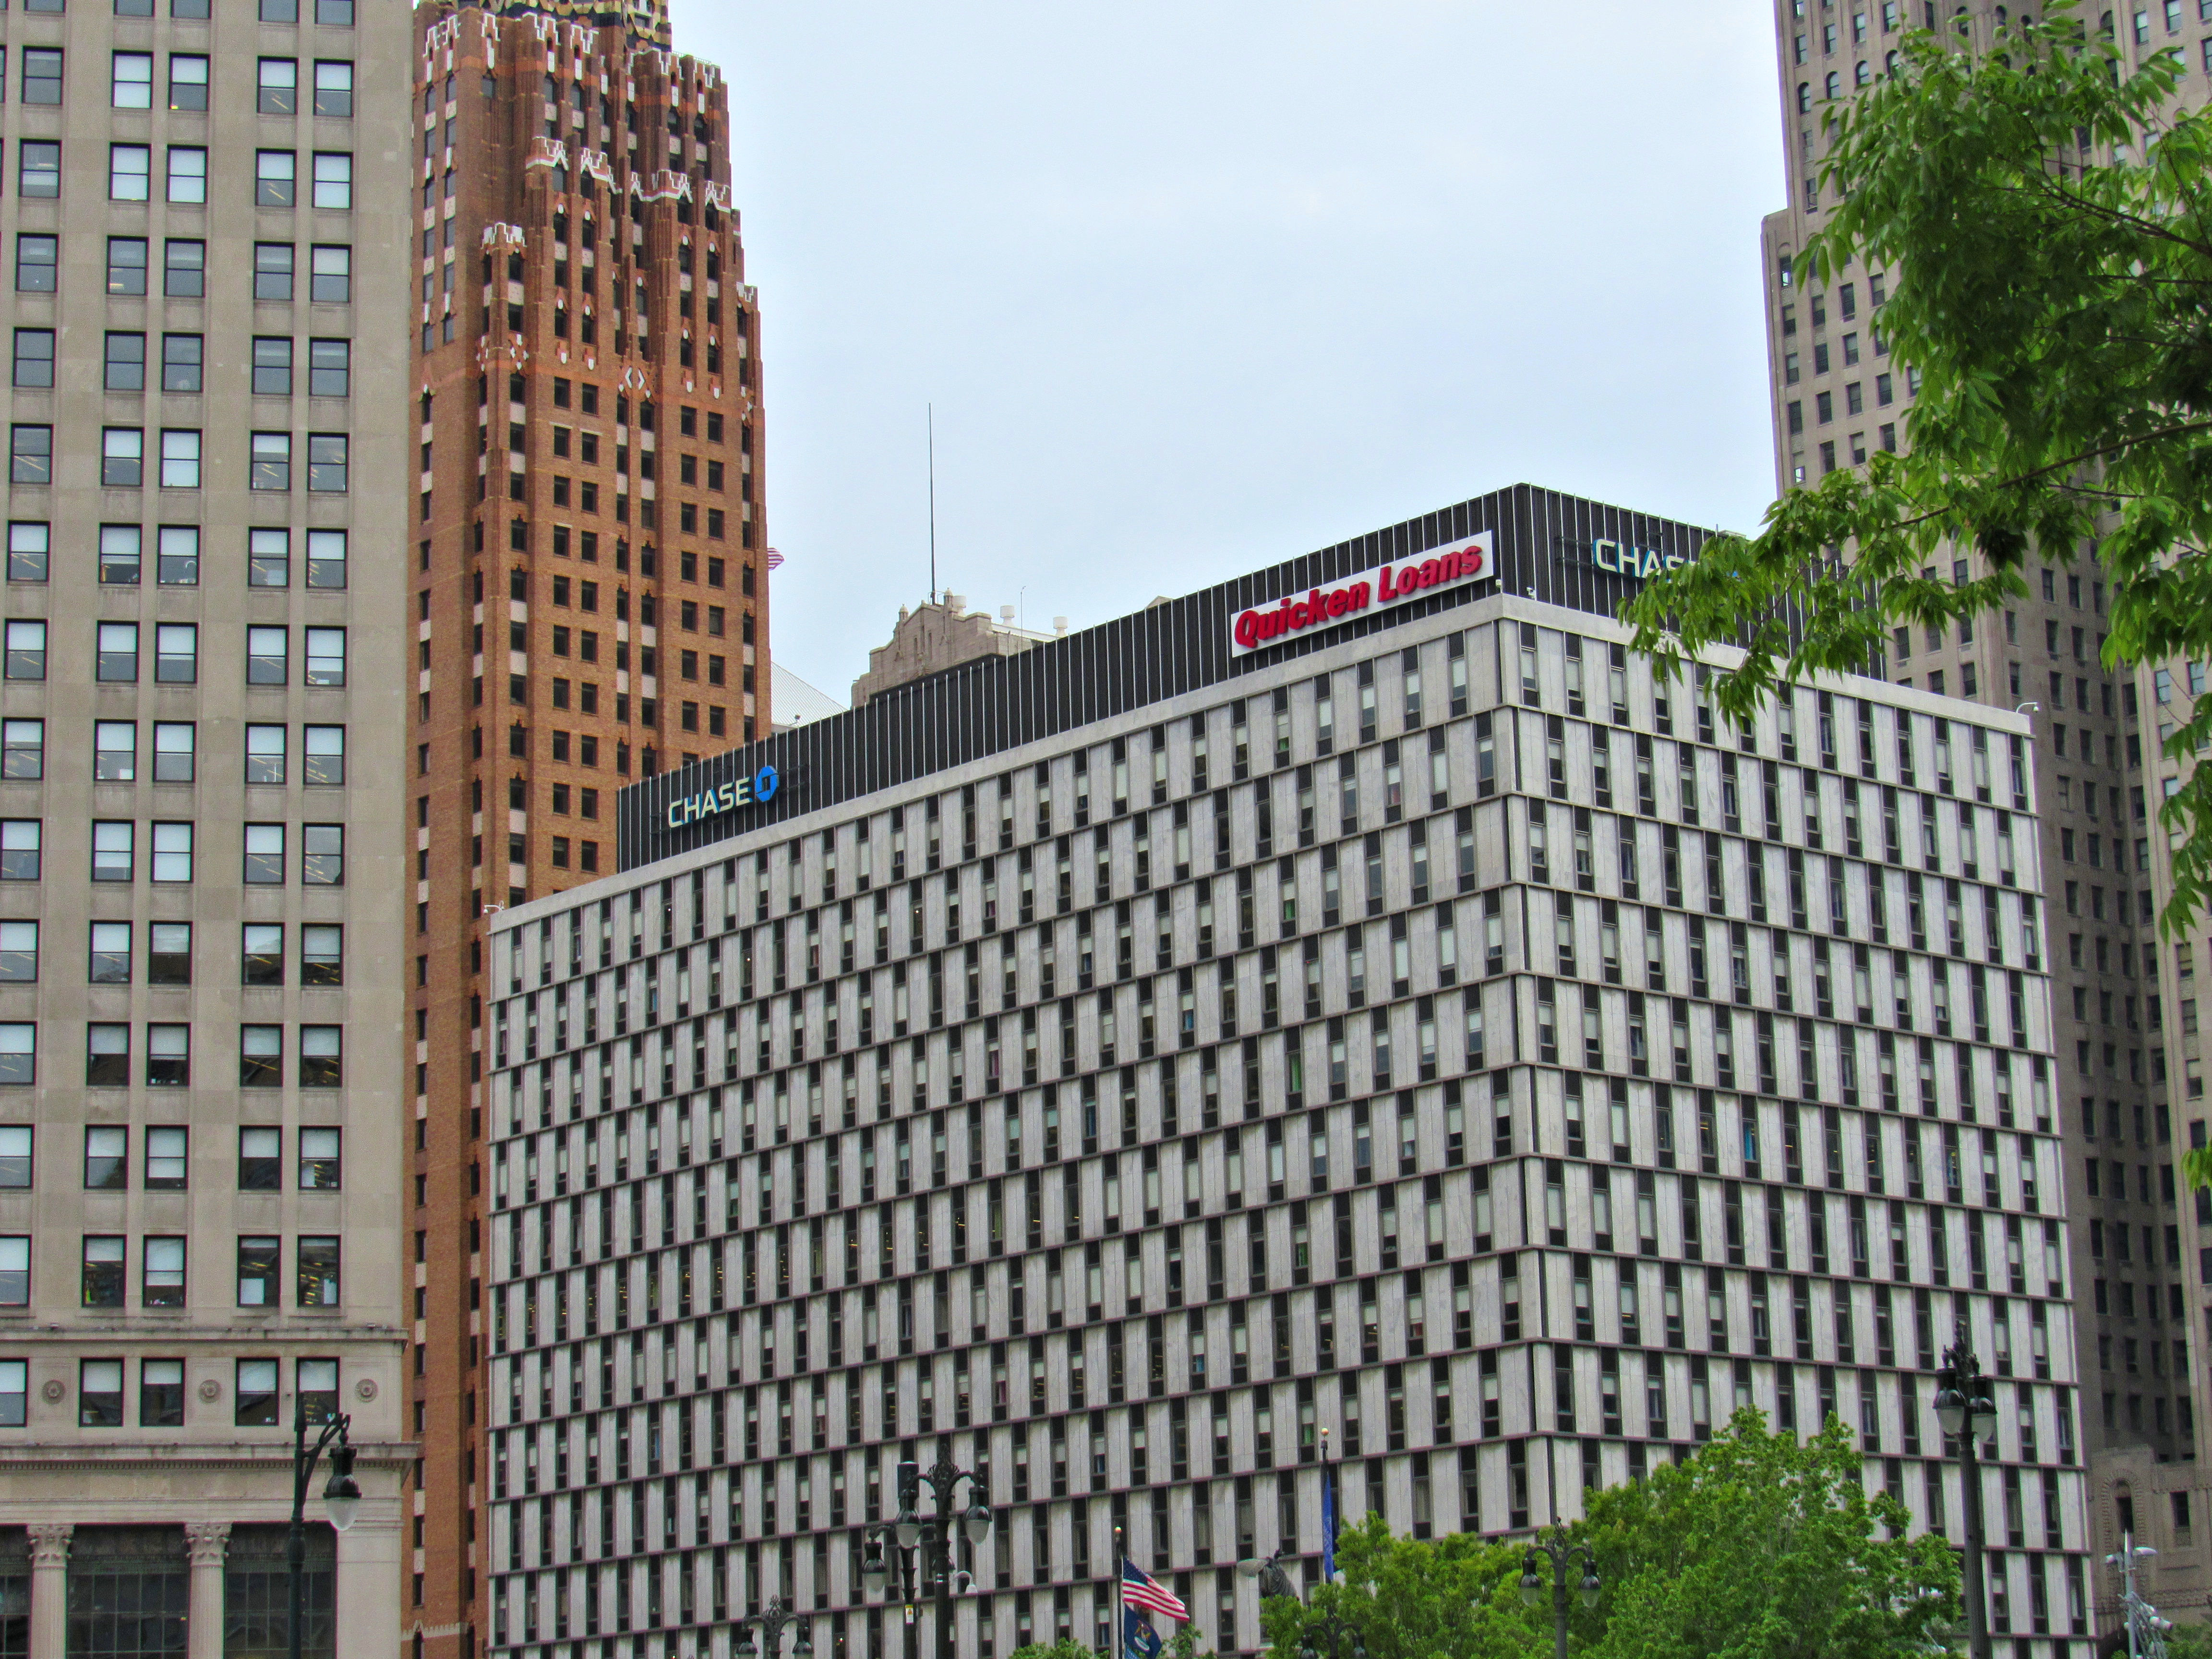 A multi-story rectangular building with alternating windows white cladding. The top of the building has the words “Quicken Loans.”